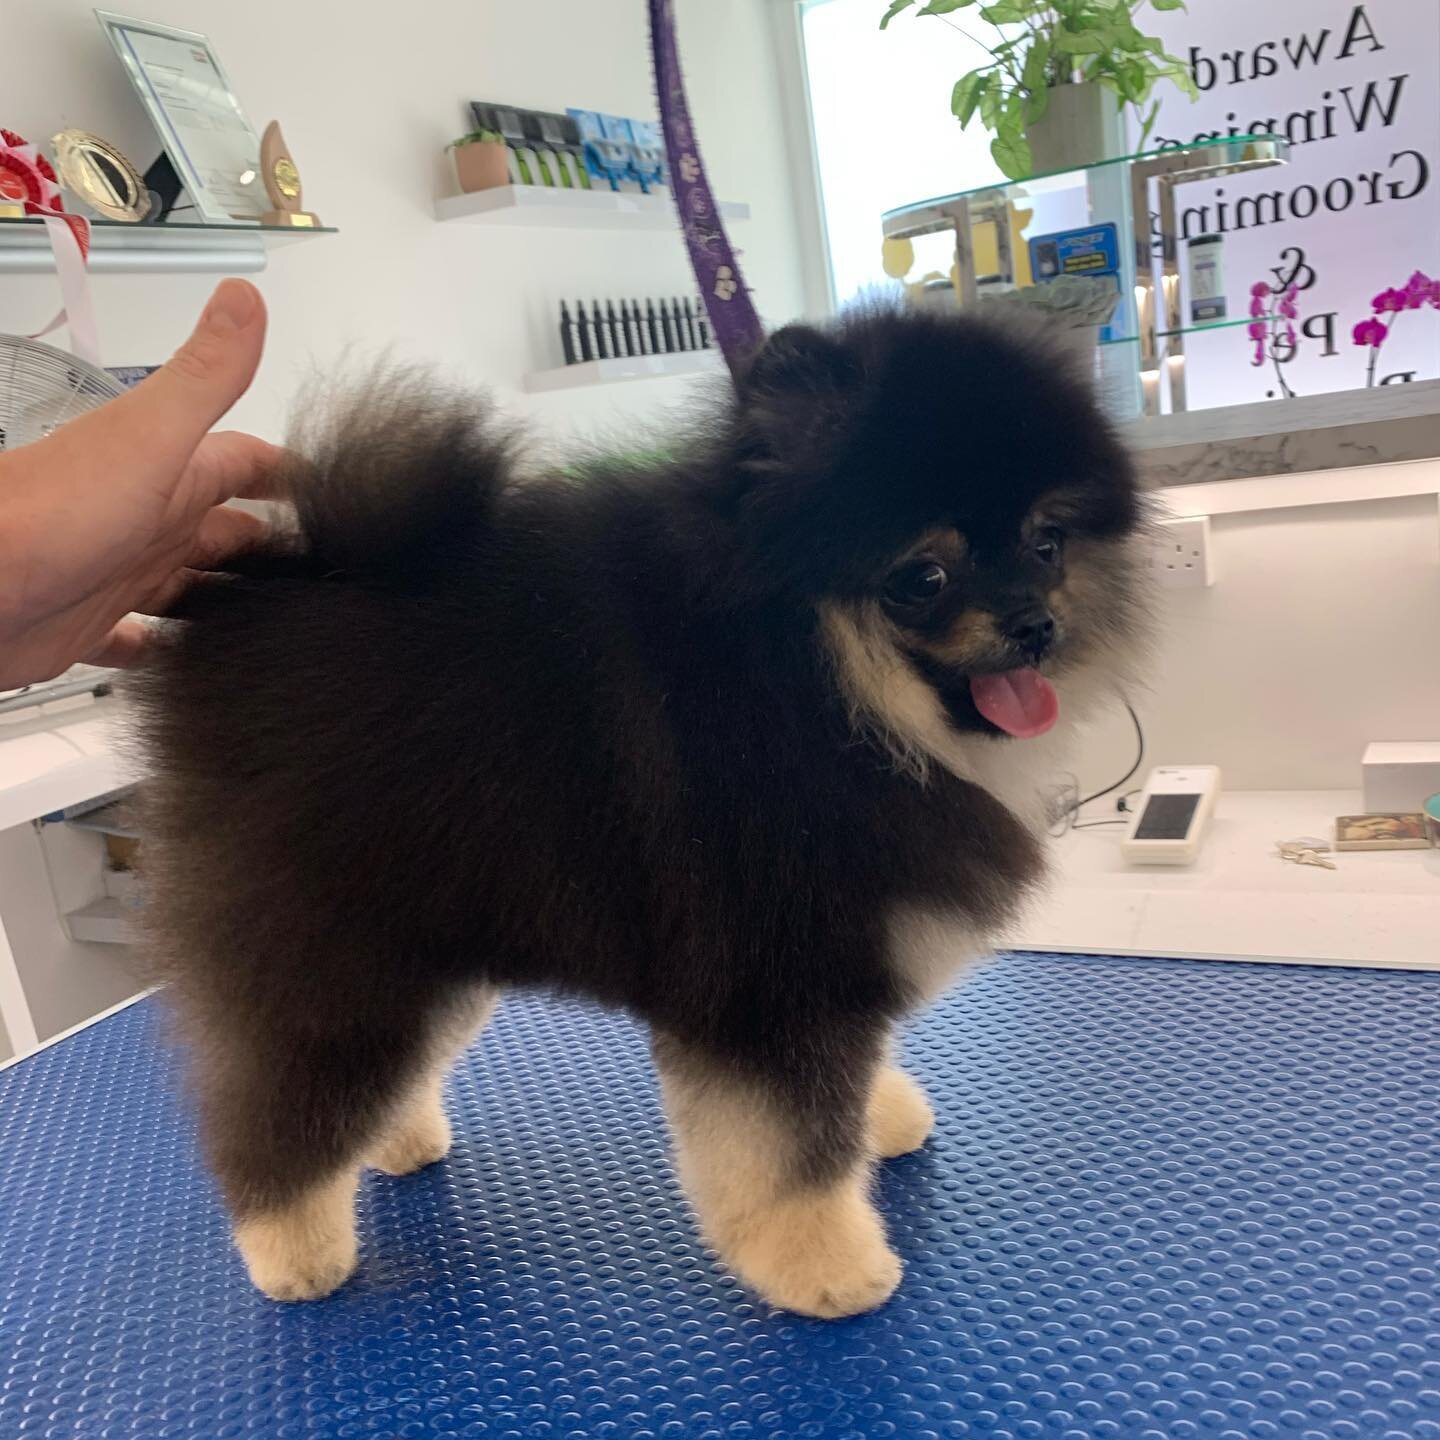 One very cute little Pom pup 🐶 Swipe to see his before! ➡️ 
.
.
.
.
.
#petspaessex #brentwood #essex #doggrooming #doggroomingofinstagram #dog #doggroomer #doggroominglife #doglover #pomeranian #pom #pomeraniansofinstagram #pomeranianpuppy #pomerani